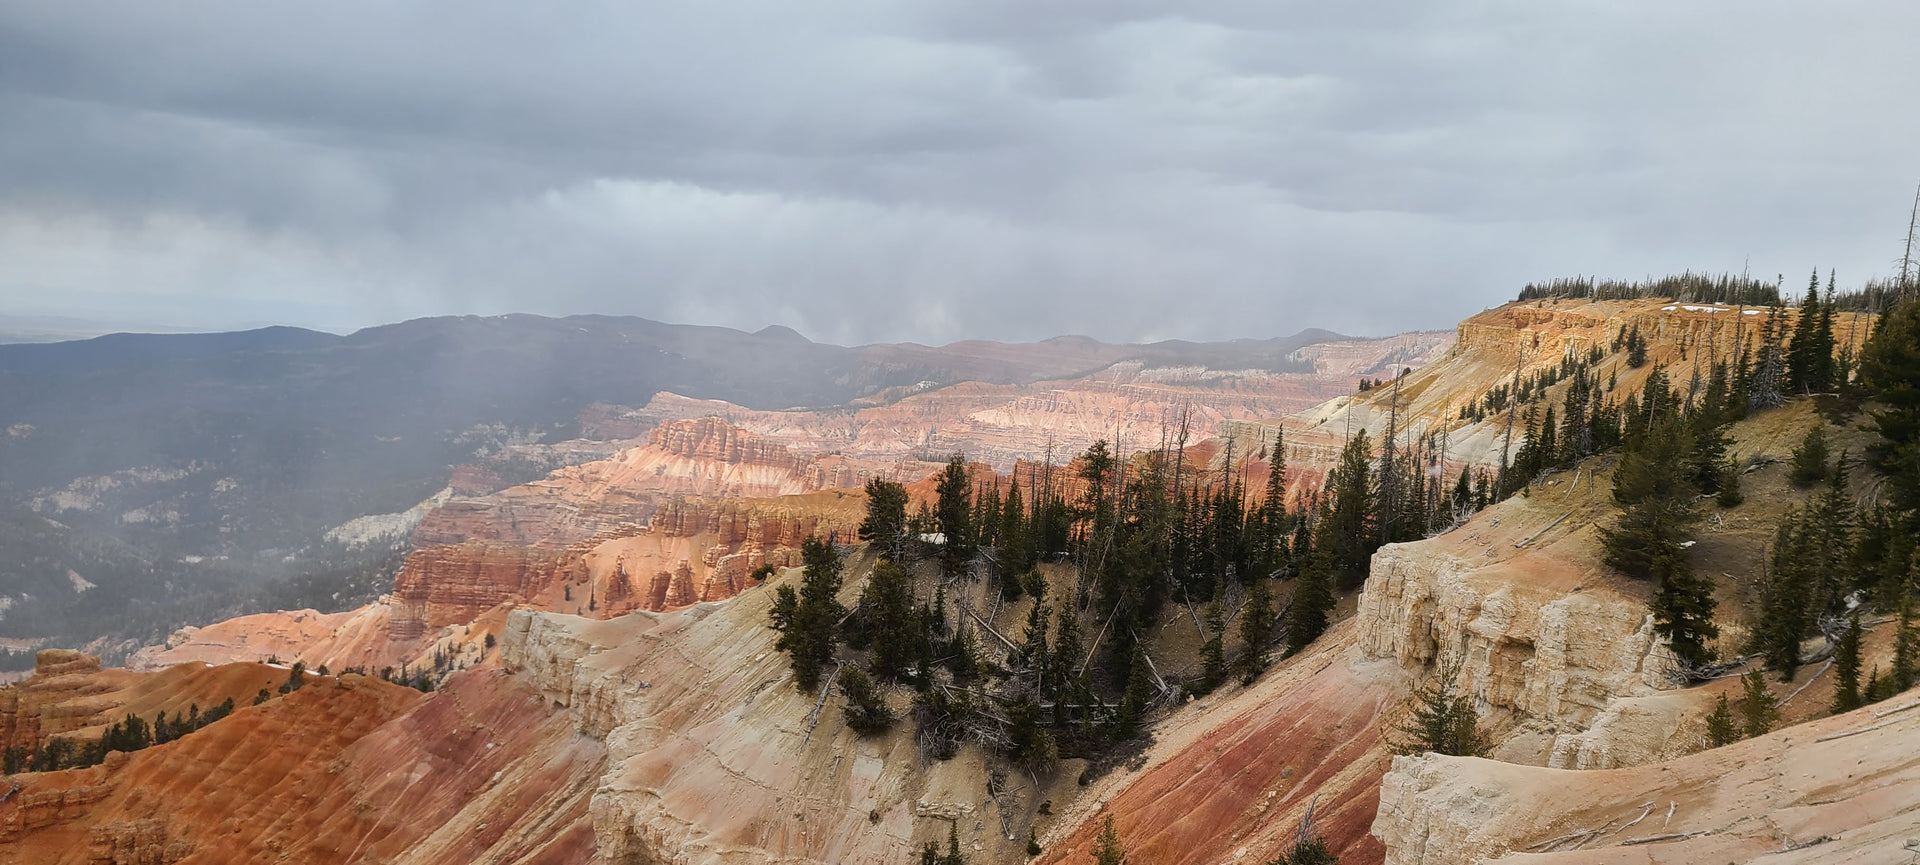 Storm over Bryce Canyon National Park - Crosscountrycreations